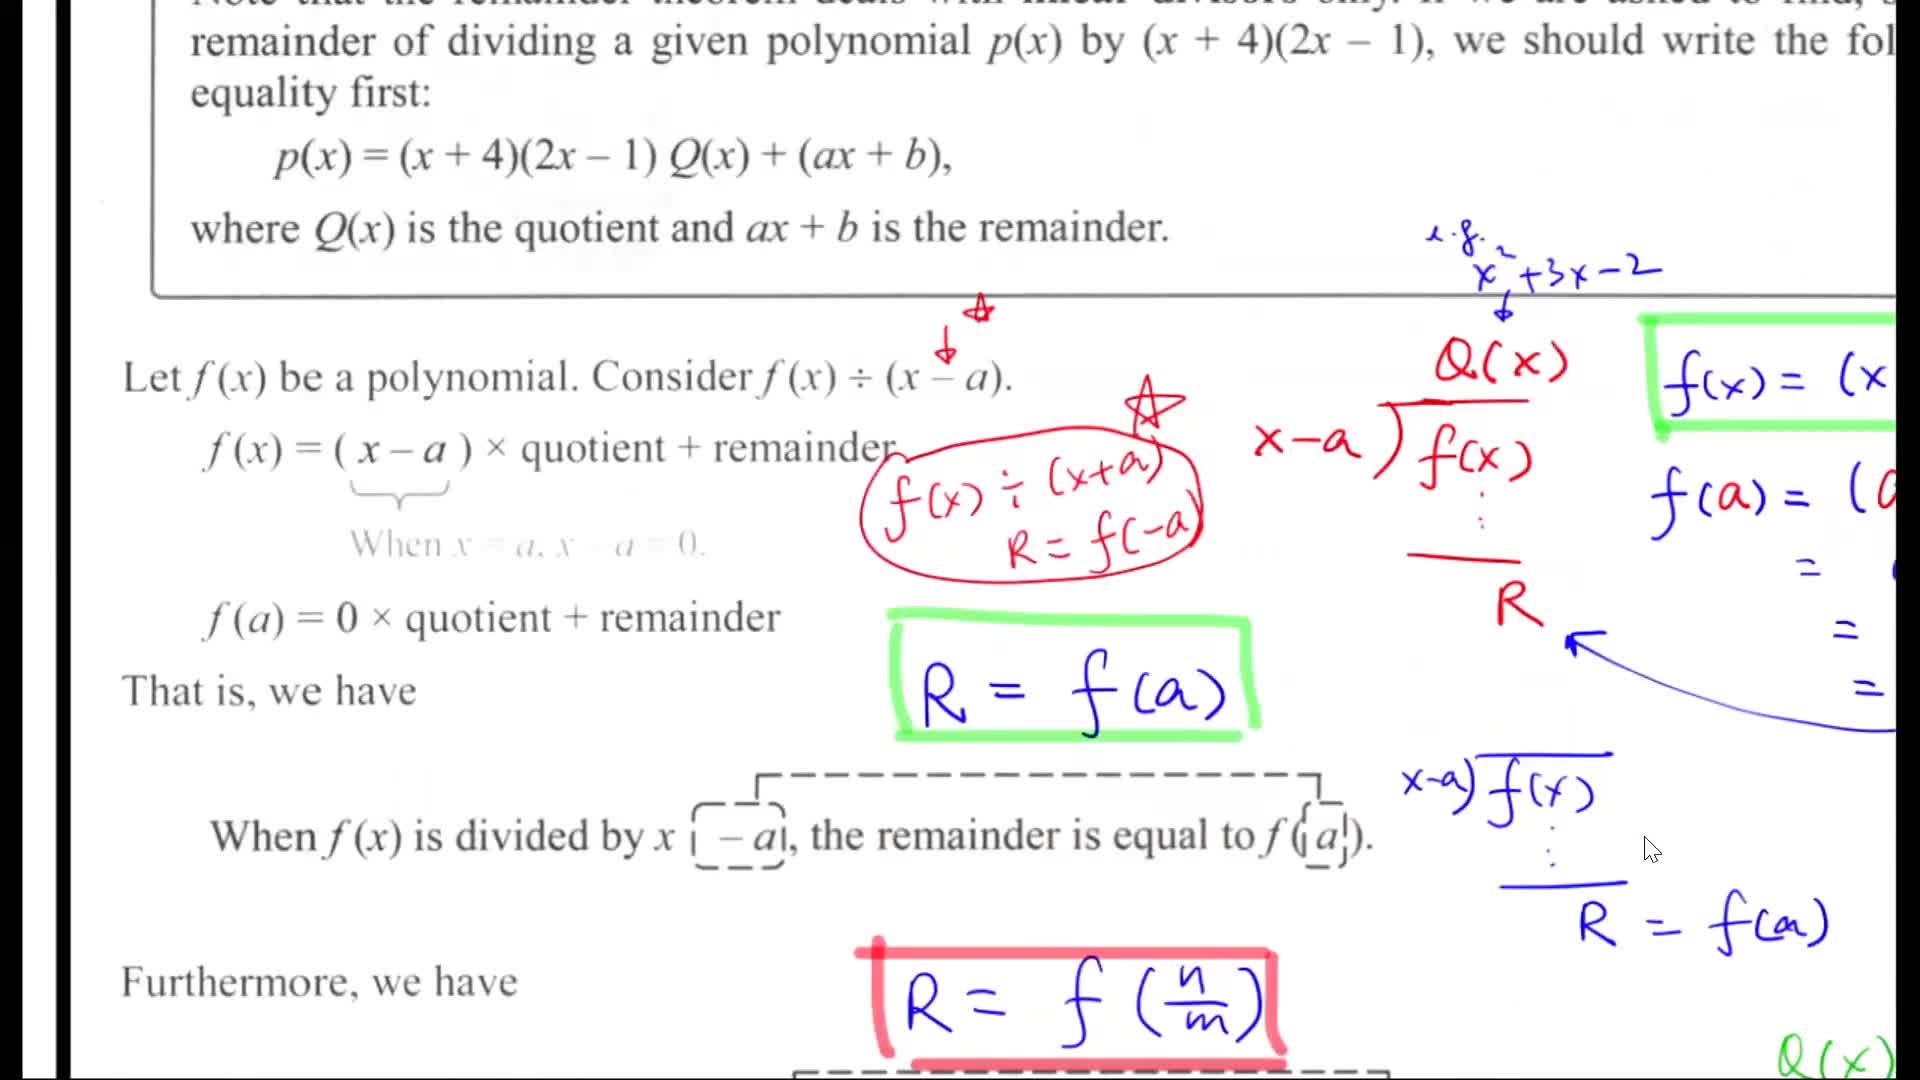 s4_math_HKDSE_Polynomial(1)_HKCEE_remainder_thm